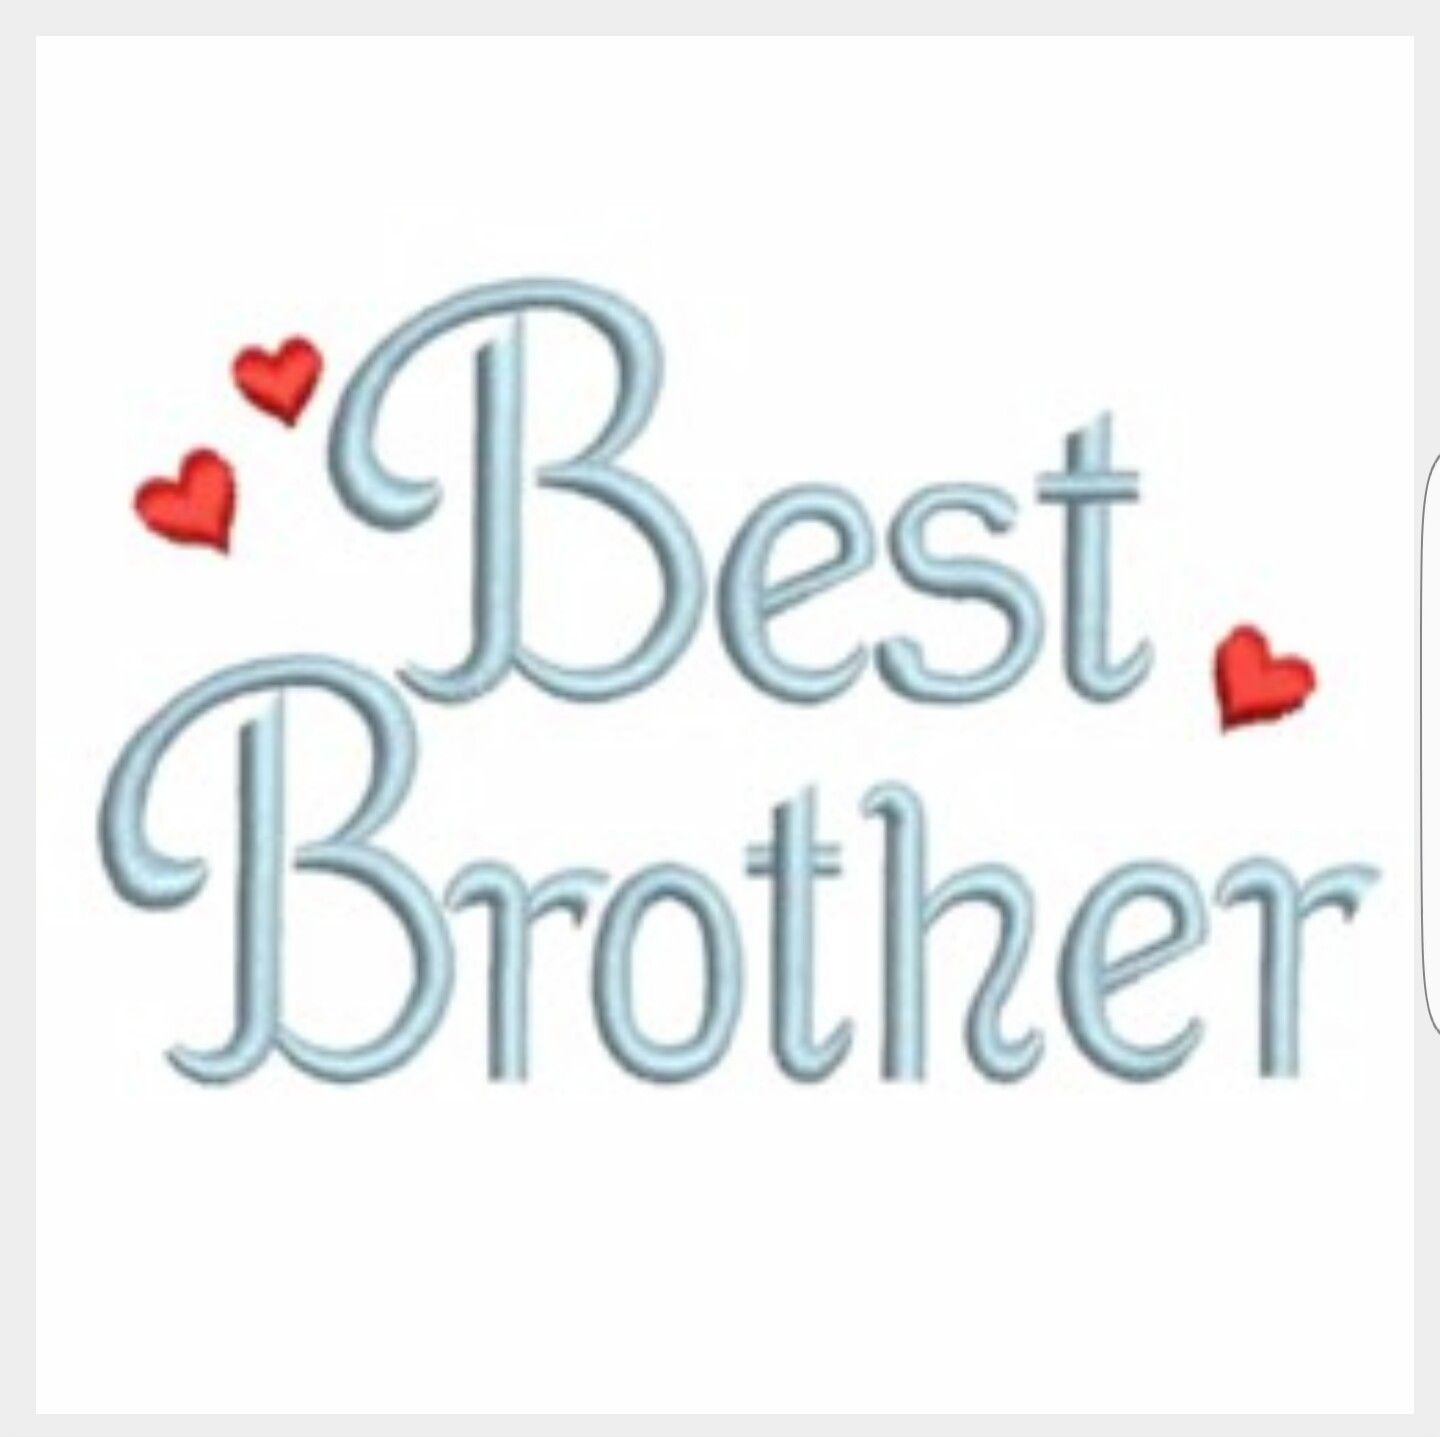 Best Brother. Sister love quotes, I love my brother, Brother sister quotes